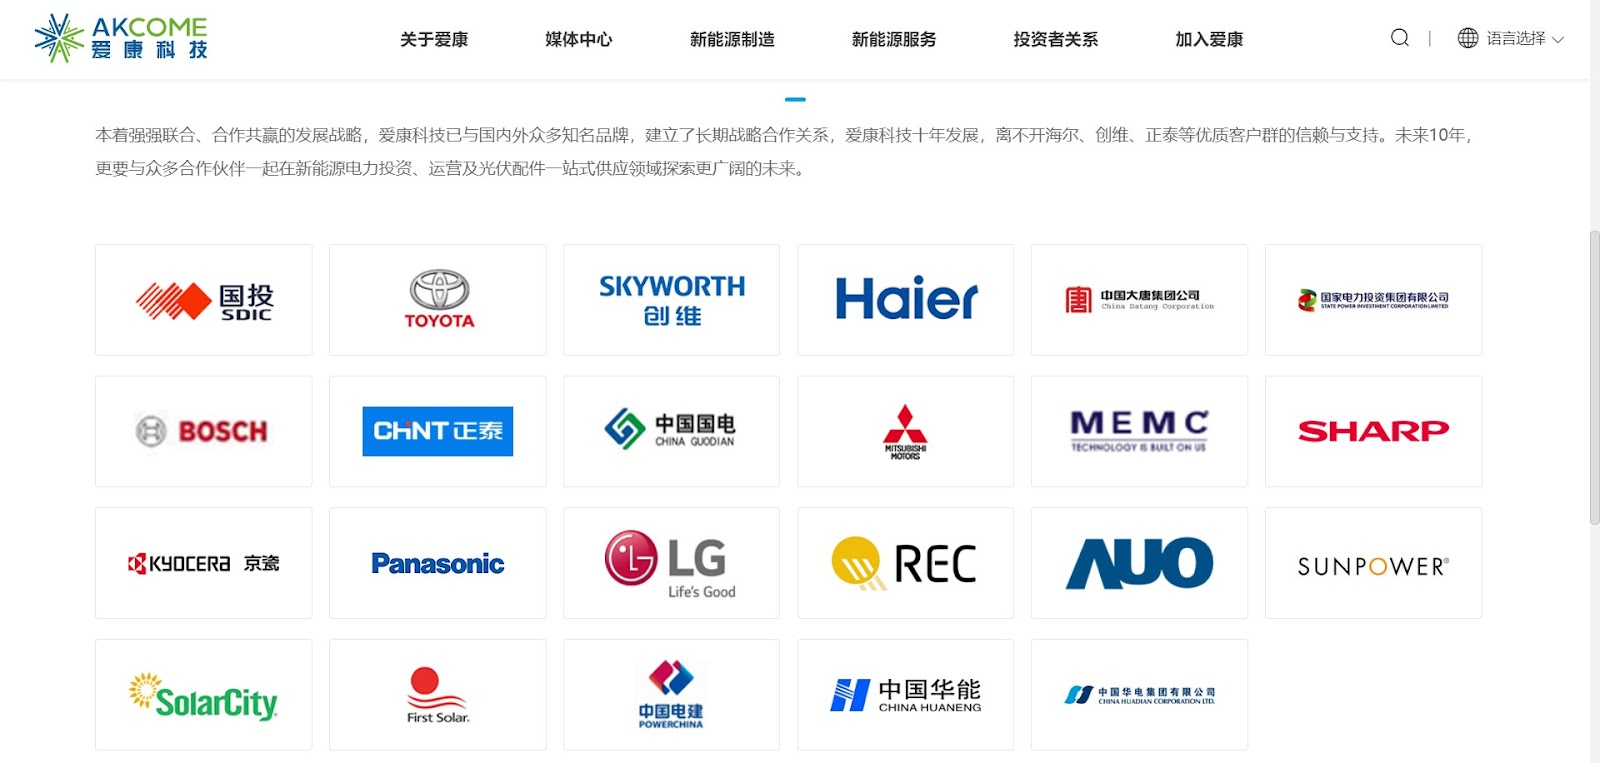 Companies claimed as business partners by the Akcome Technology Group